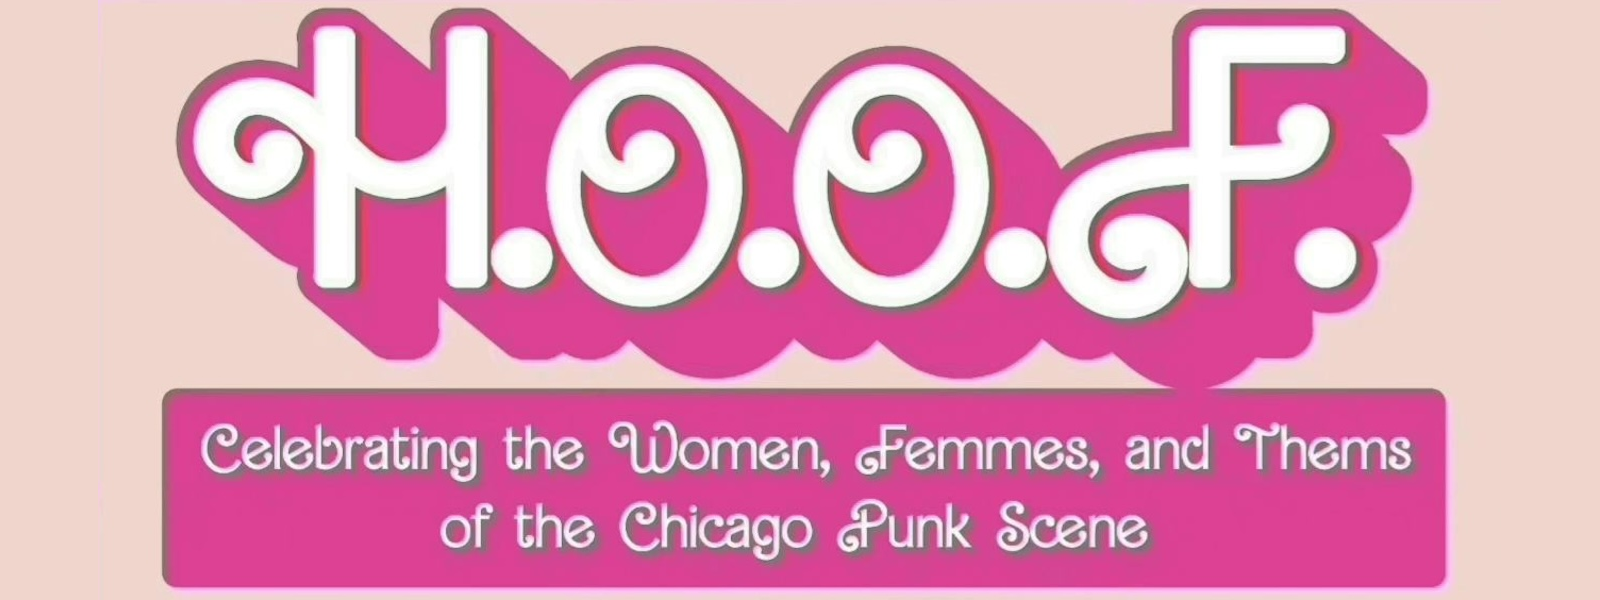 H.O.O.F. Music Festival Celebrates the Women, Femmes, and Thems of Chicago Punk Scene